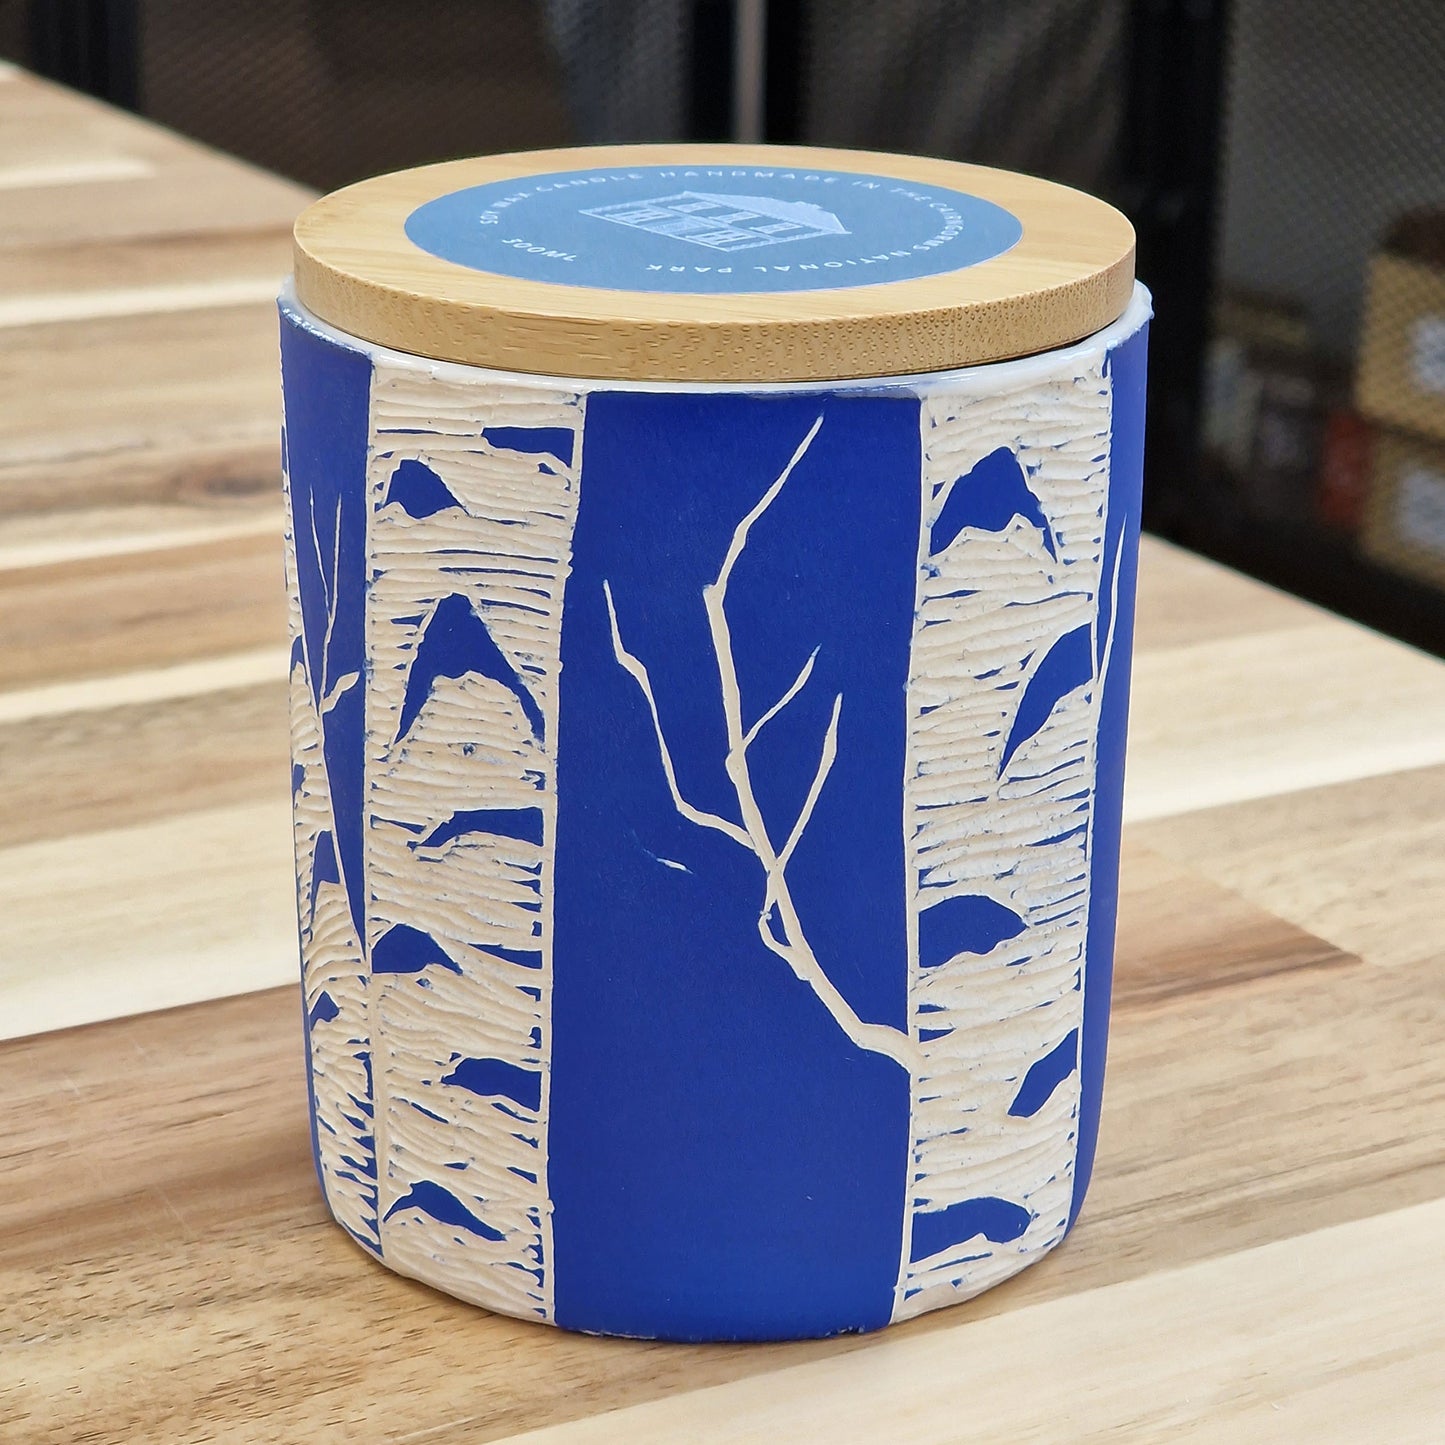 A lidded ceramic pot with a birch tree carving on the surface